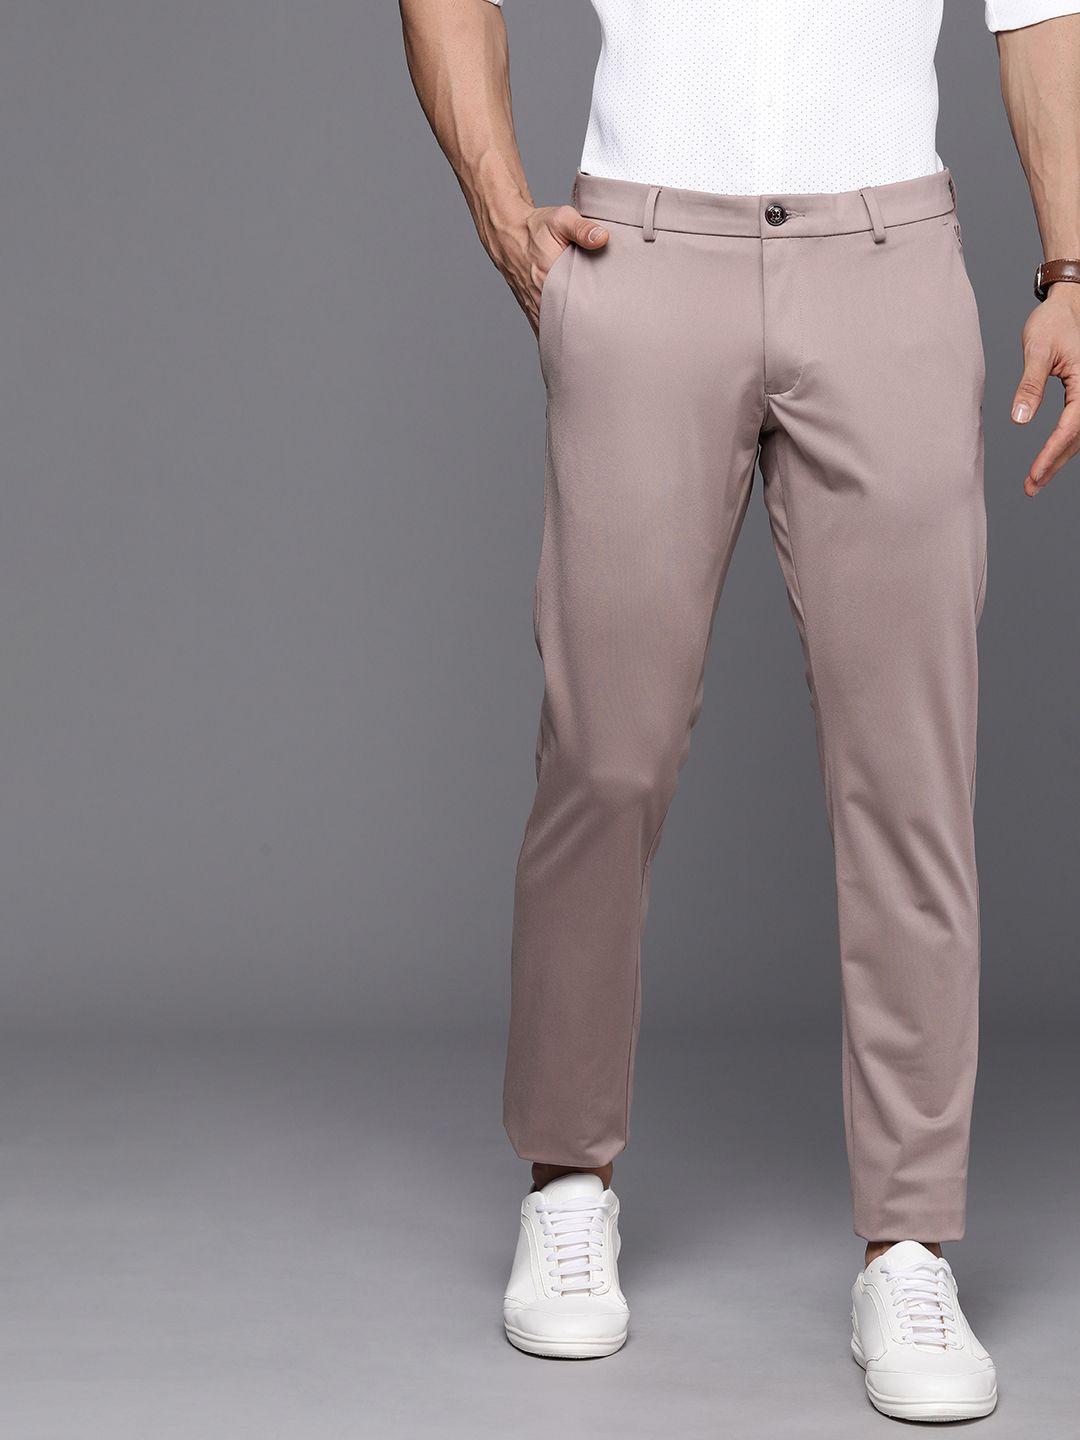 allen solly men slim fit chinos trousers